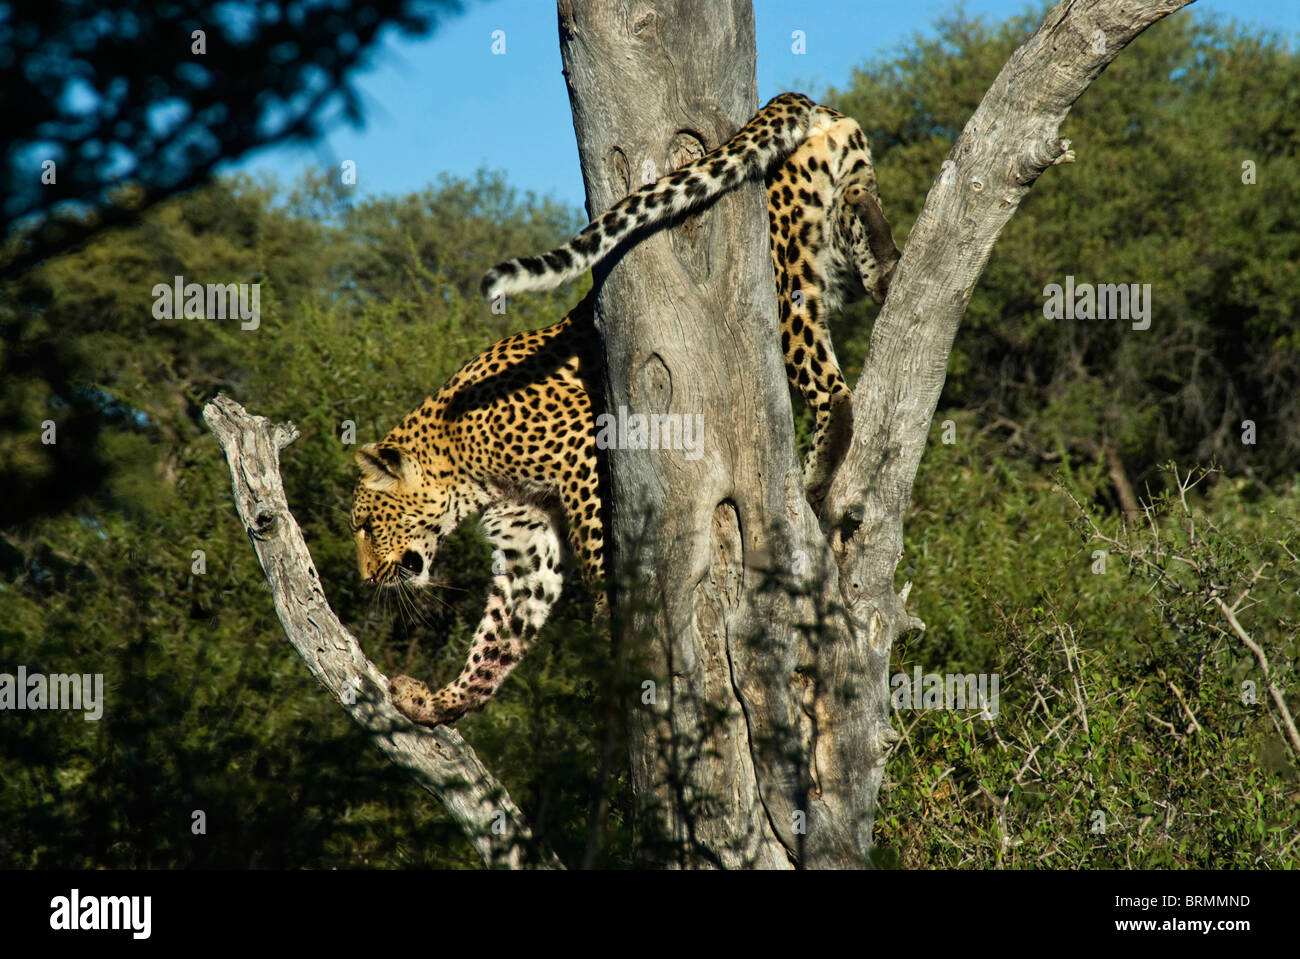 Leopard climbing down a dry tree trunk Stock Photo